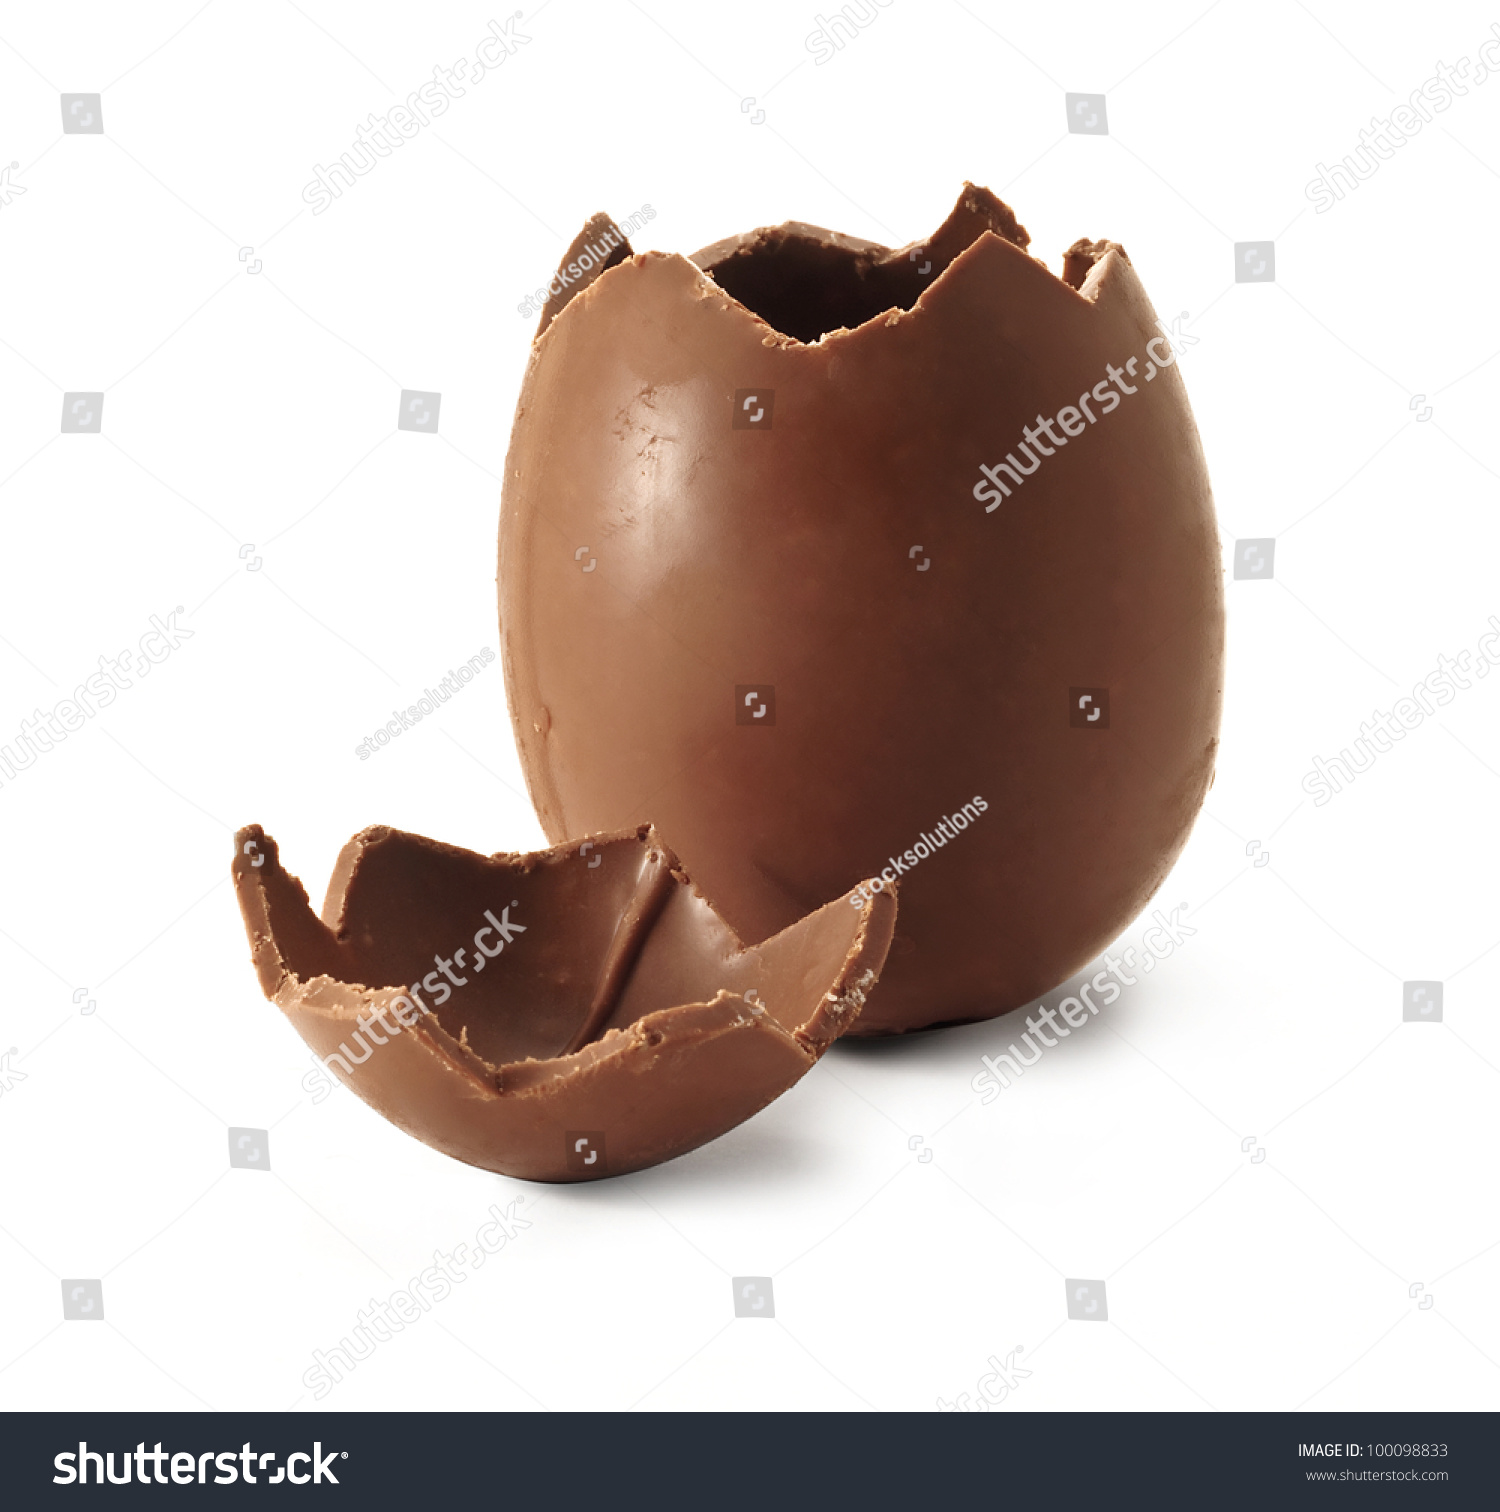 Chocolate Easter egg with the top broken off #100098833